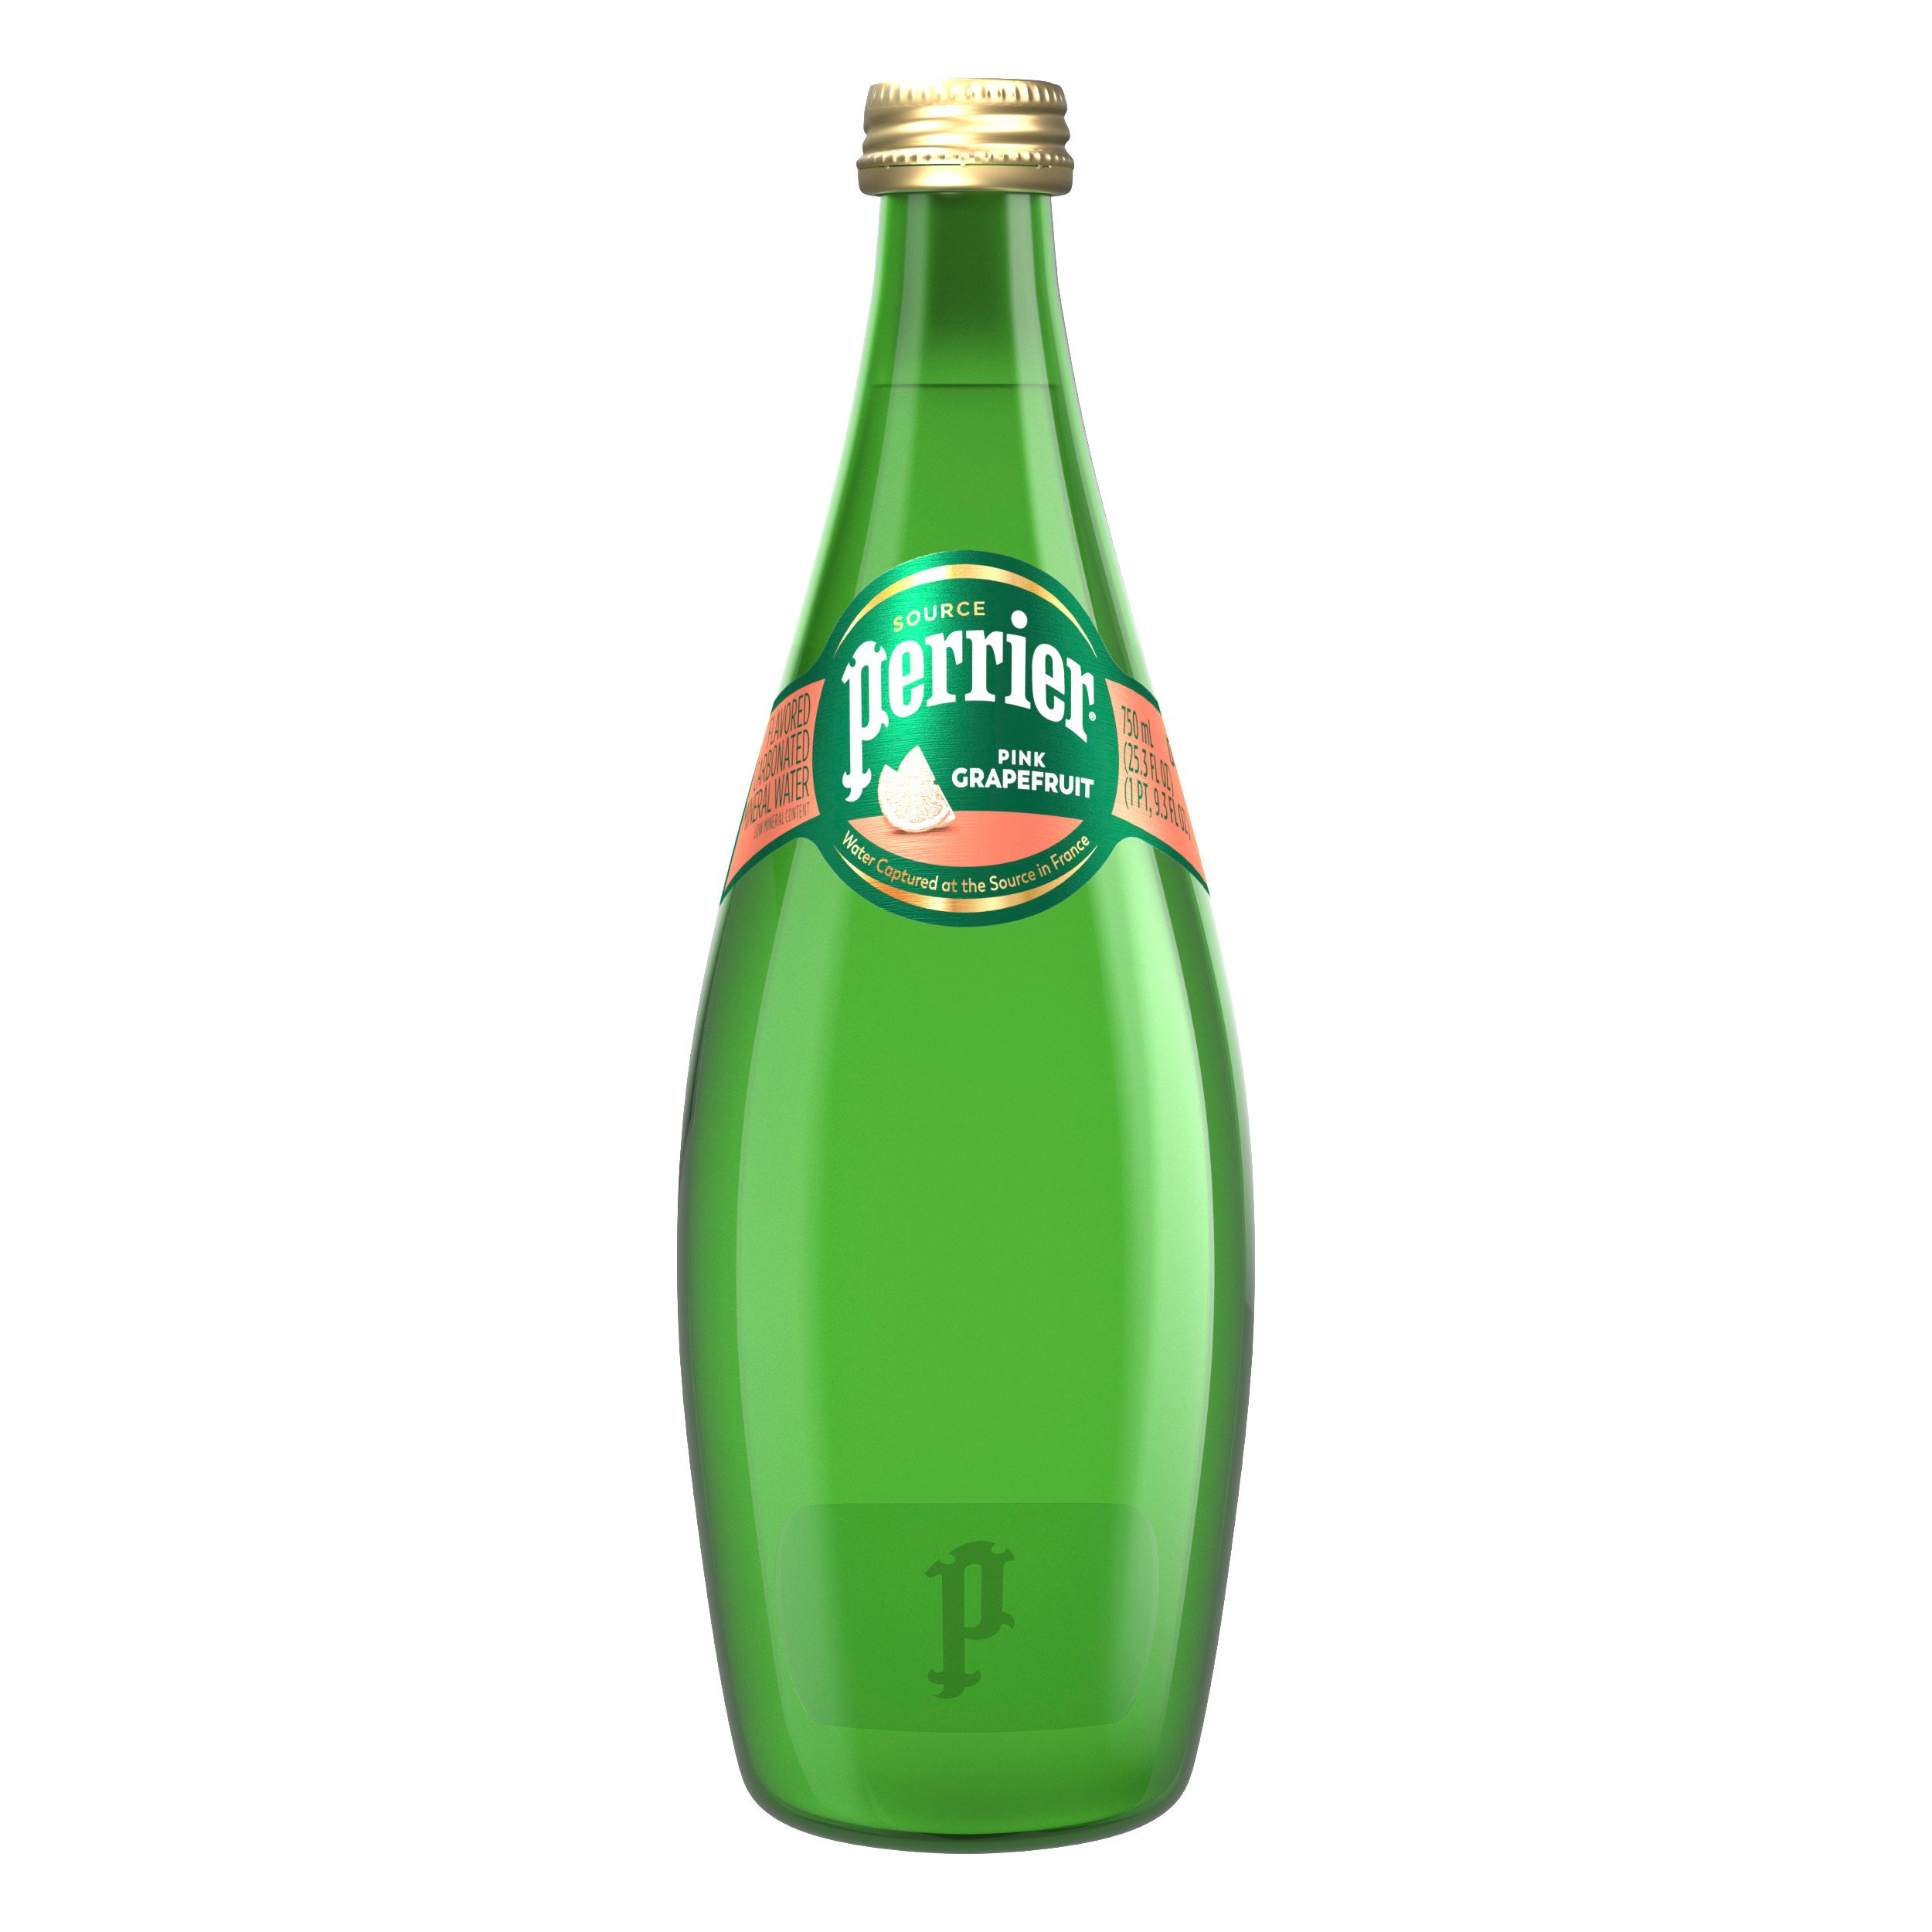 Perrier Carbonated Mineral Water 8 45 Fl Oz Slim Cans 30 Count Zero Calories Or Sweeteners Amazon Com Grocery Gourmet Food